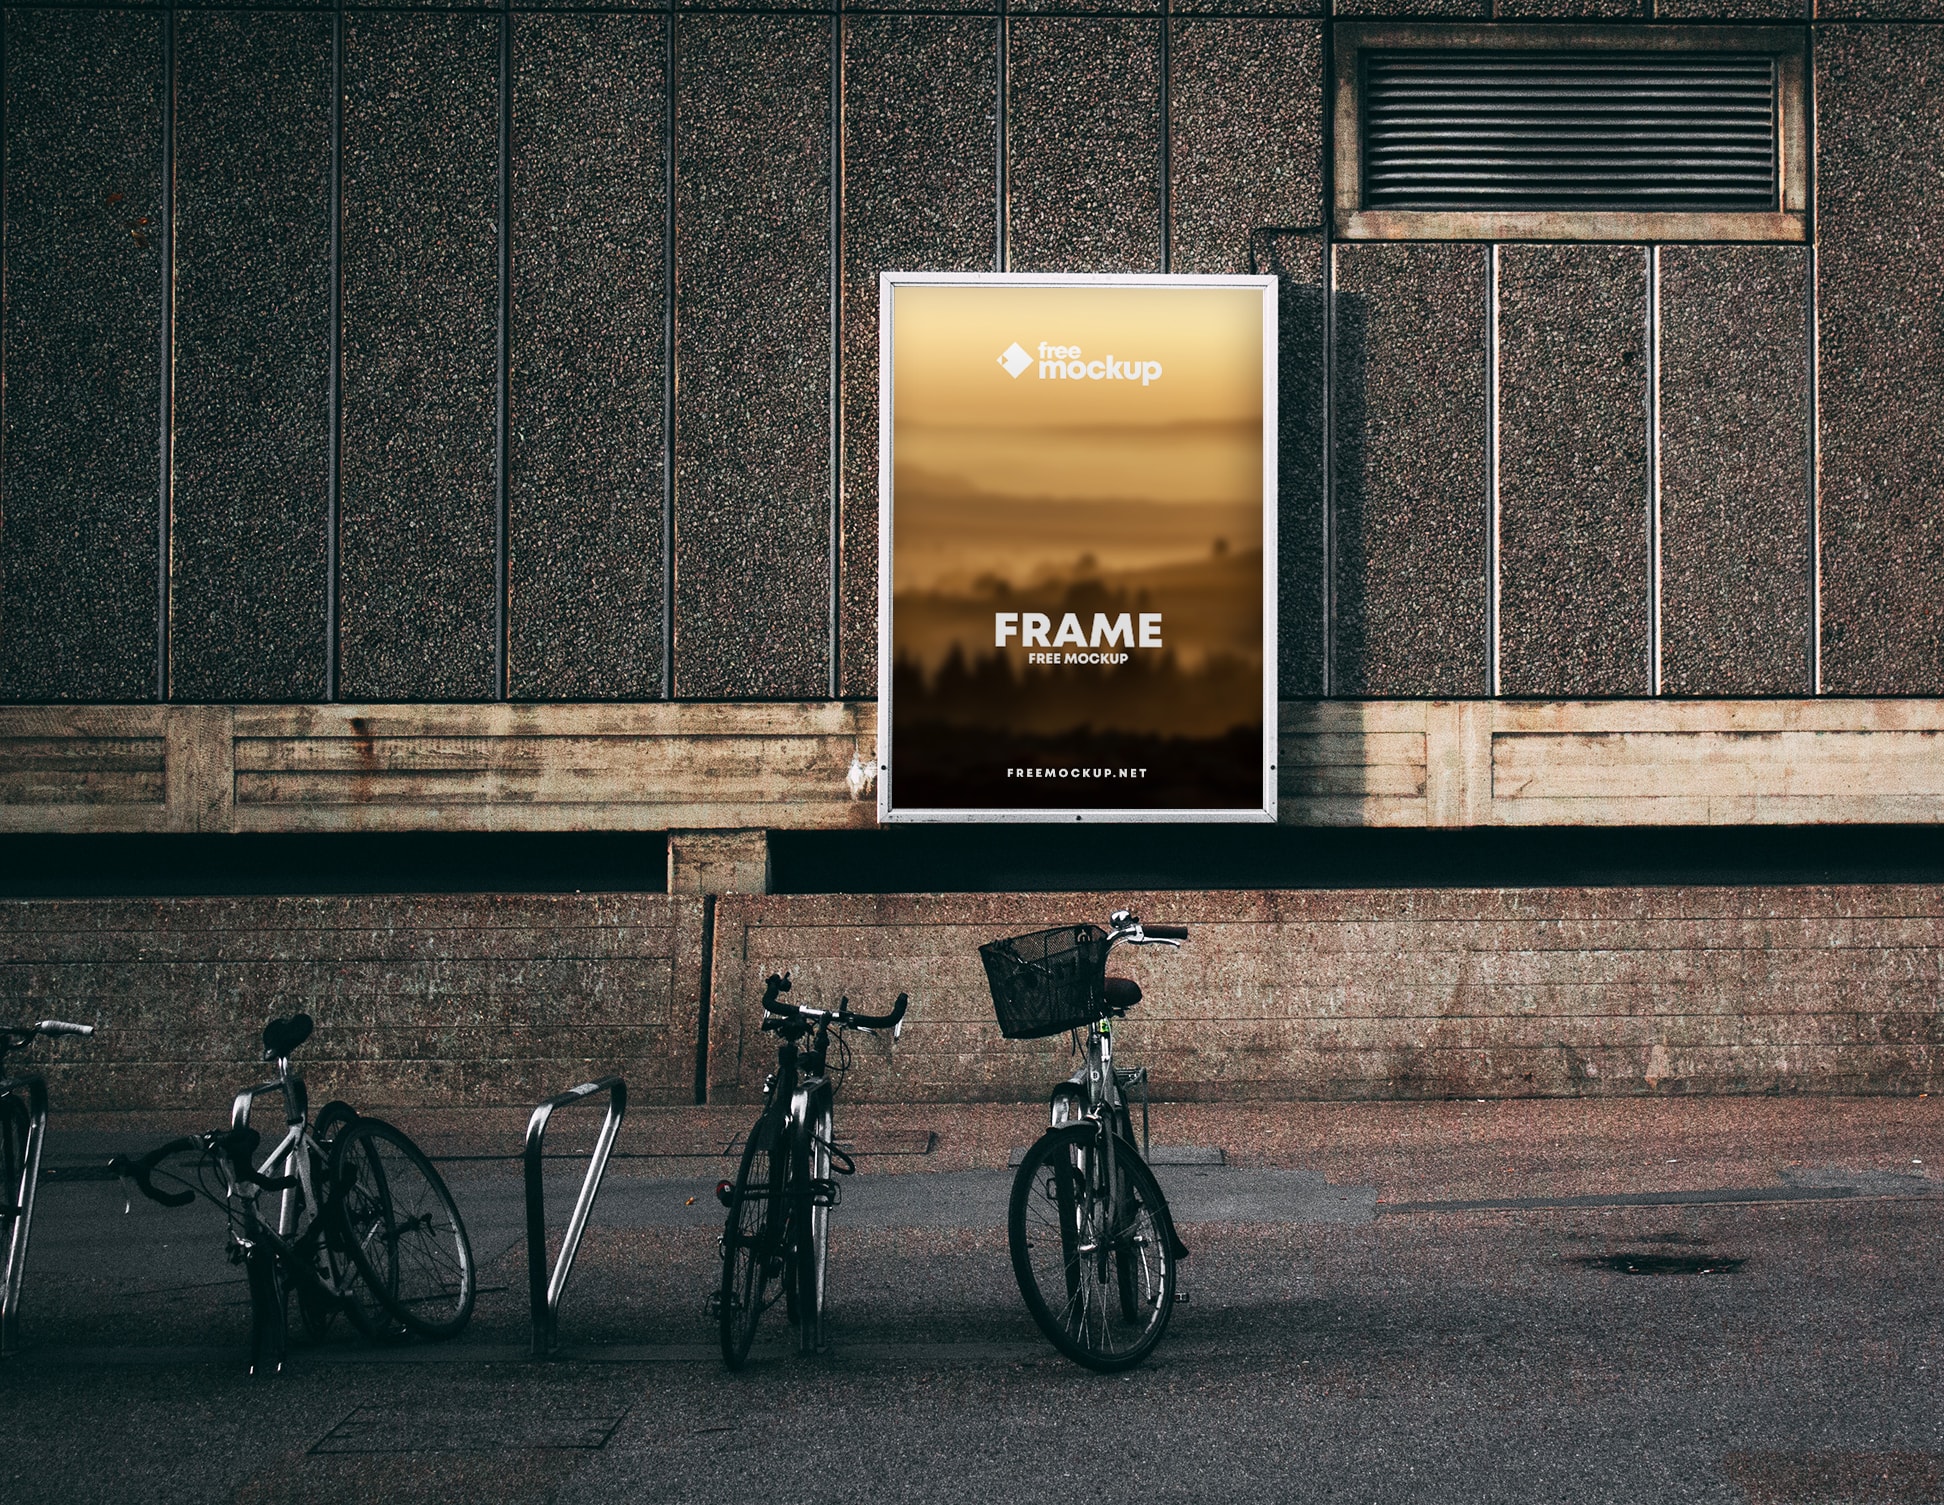 Download Poster Frame In Street With Bikes Free Mockup Freemockup Net